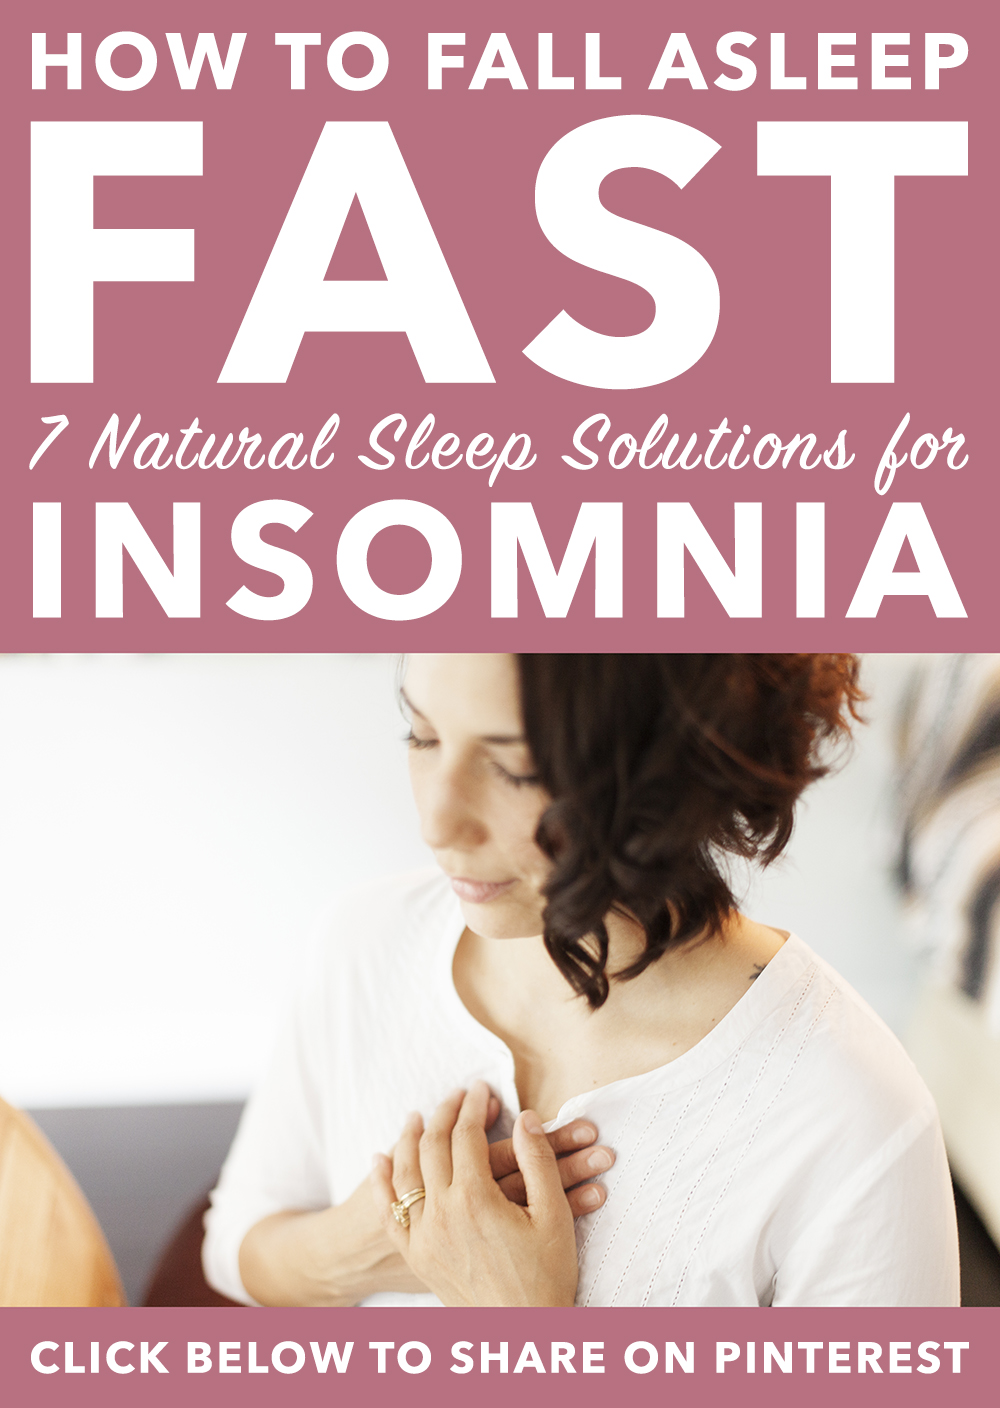 How to Fall Asleep Fast: 7 Natural Sleep Solutions for Insomnia